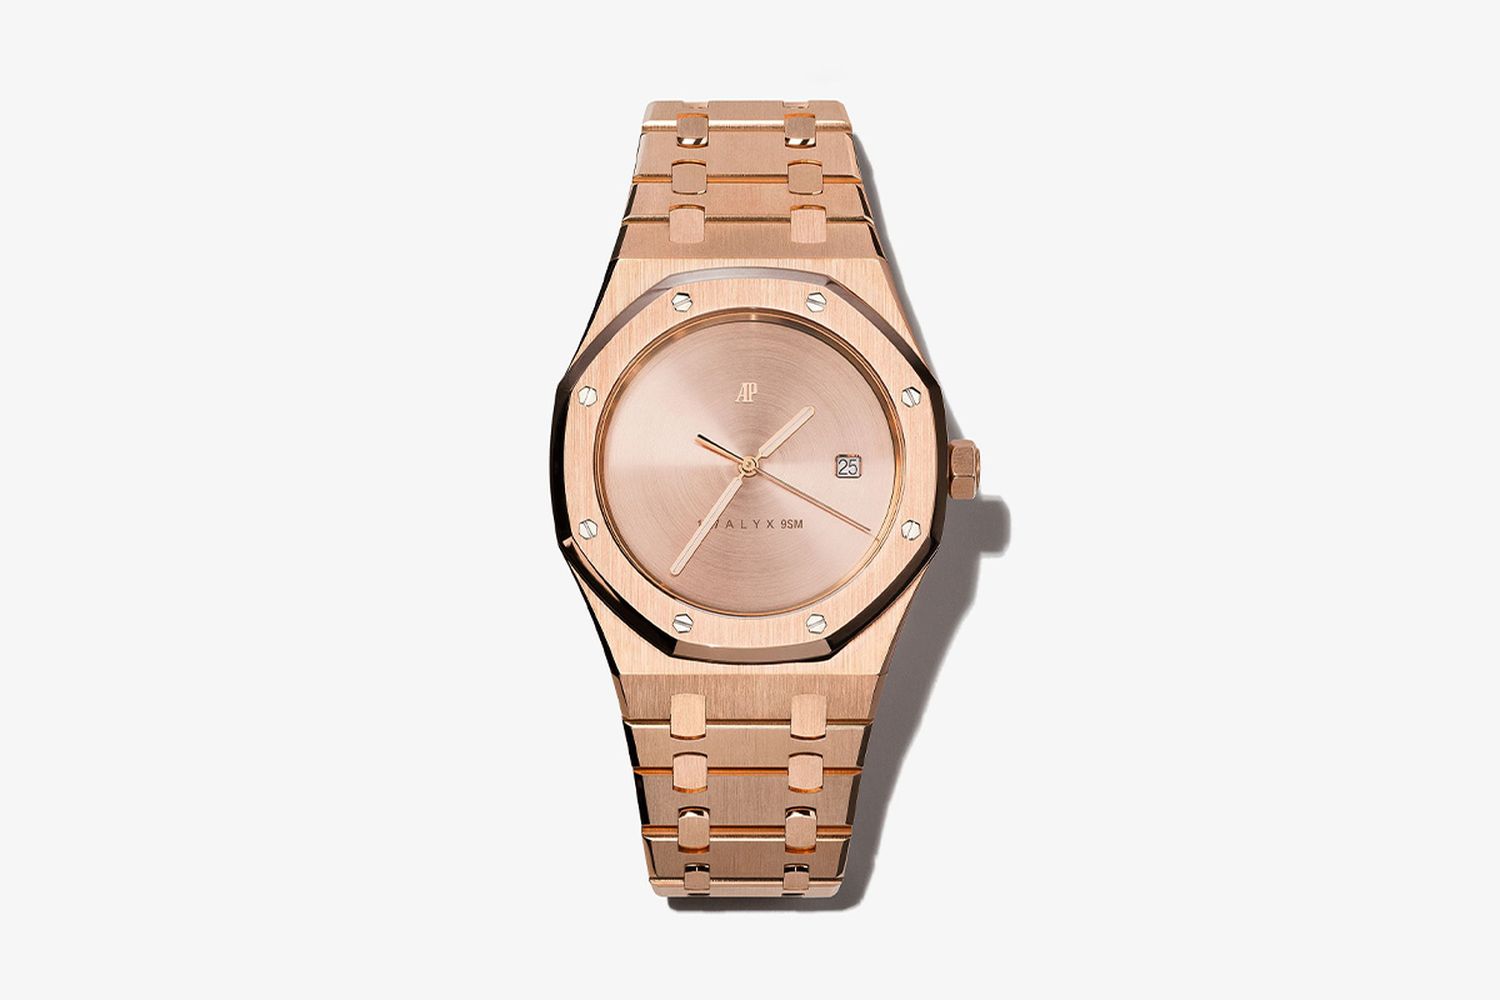 Here's Where to Cop the ALYX Audemars Piguet in Rose Gold | Urban News Now